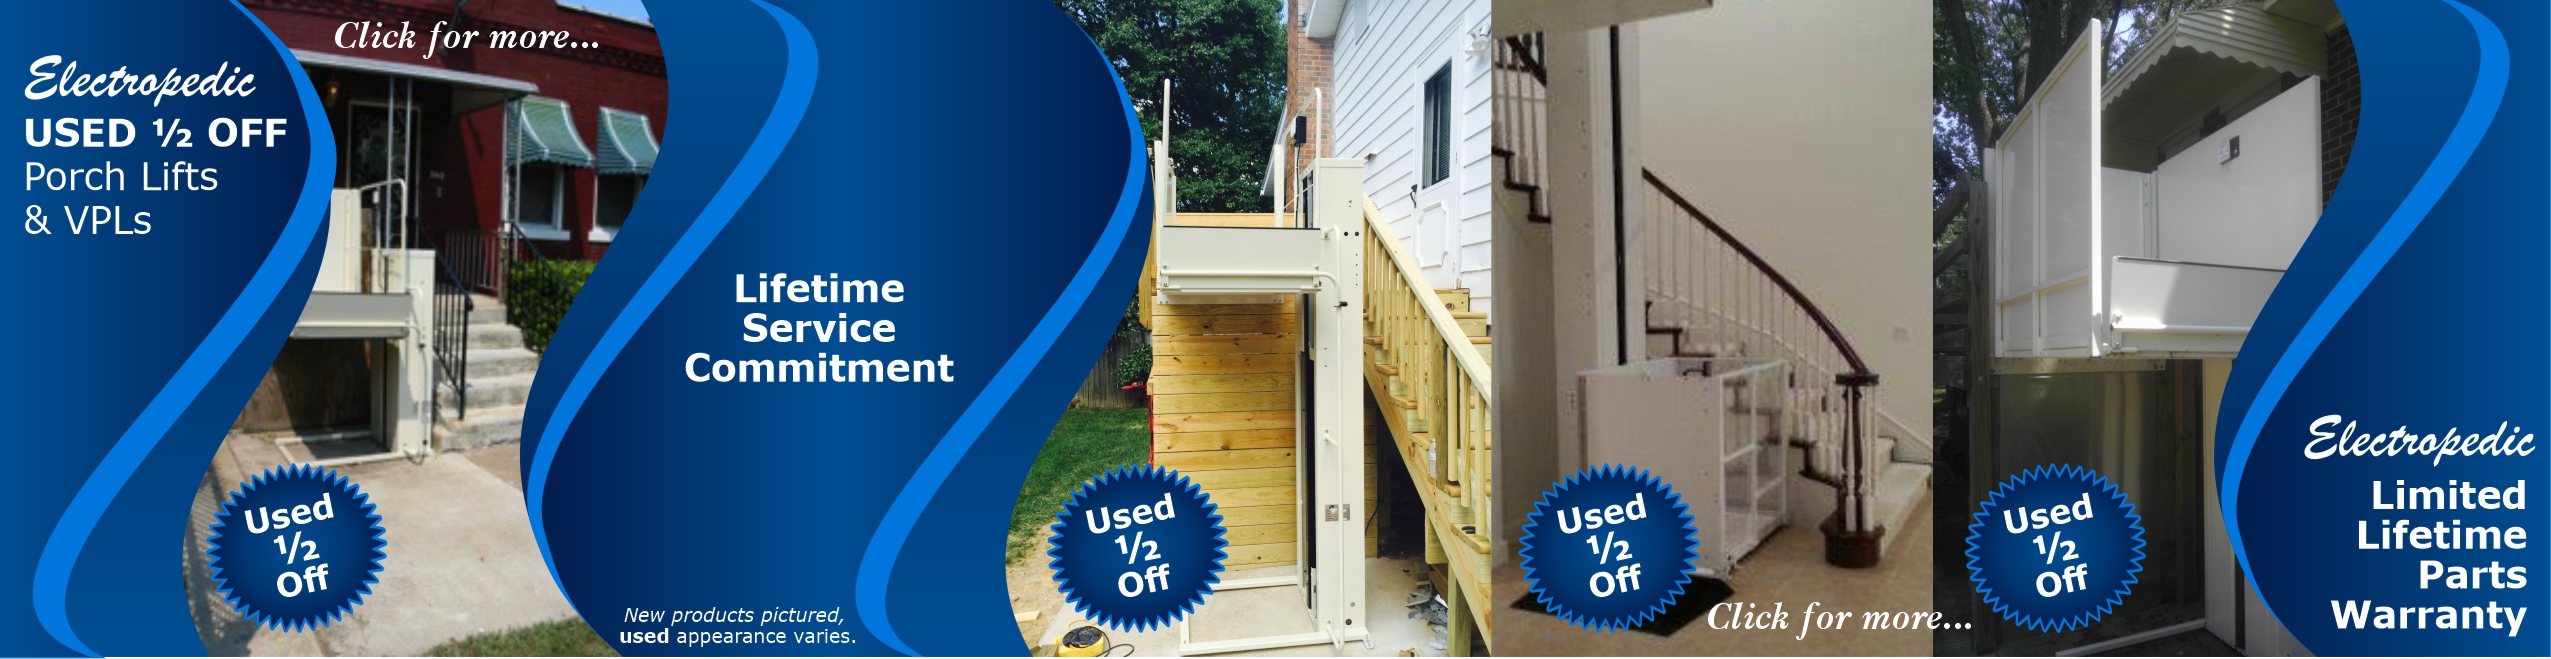 Used Porch Lifts & VPLs ½ Off